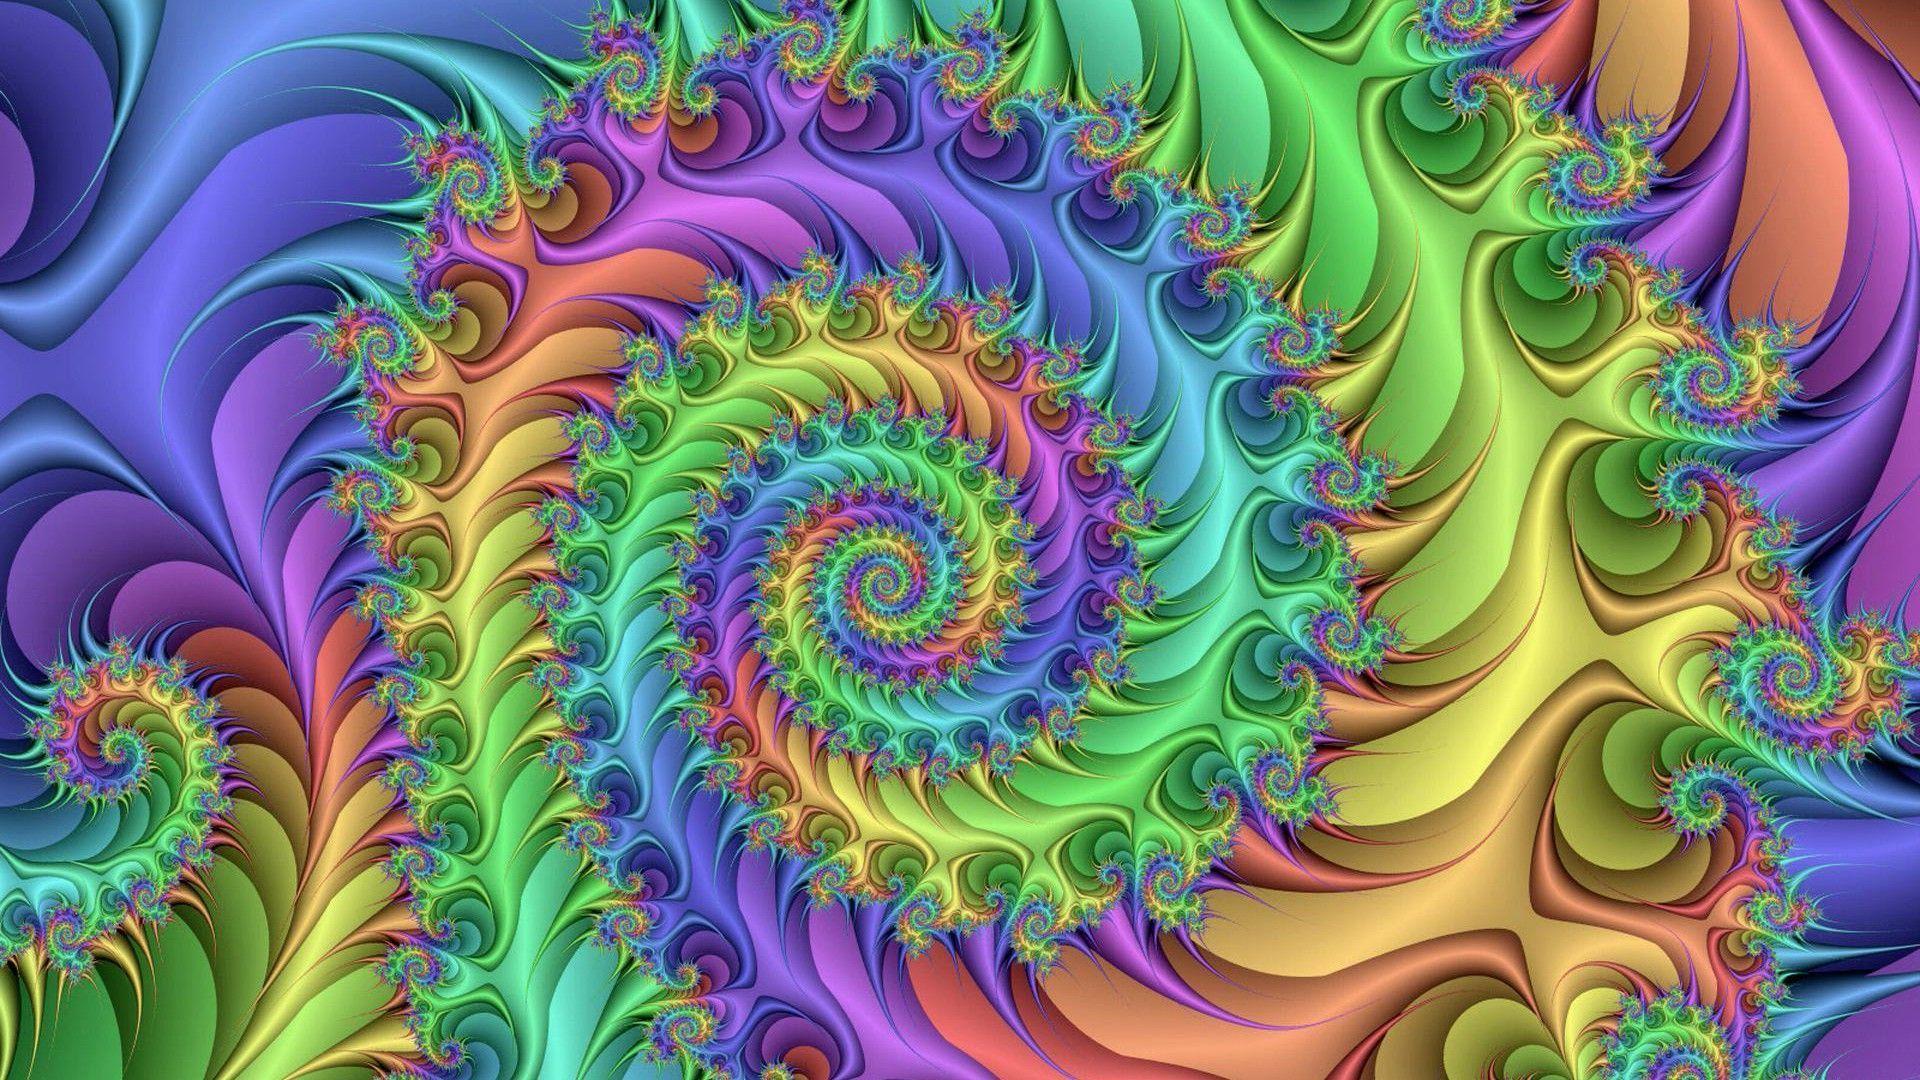 Trippy HD Wallpaper 1080p Related Keywords Amp Suggestions